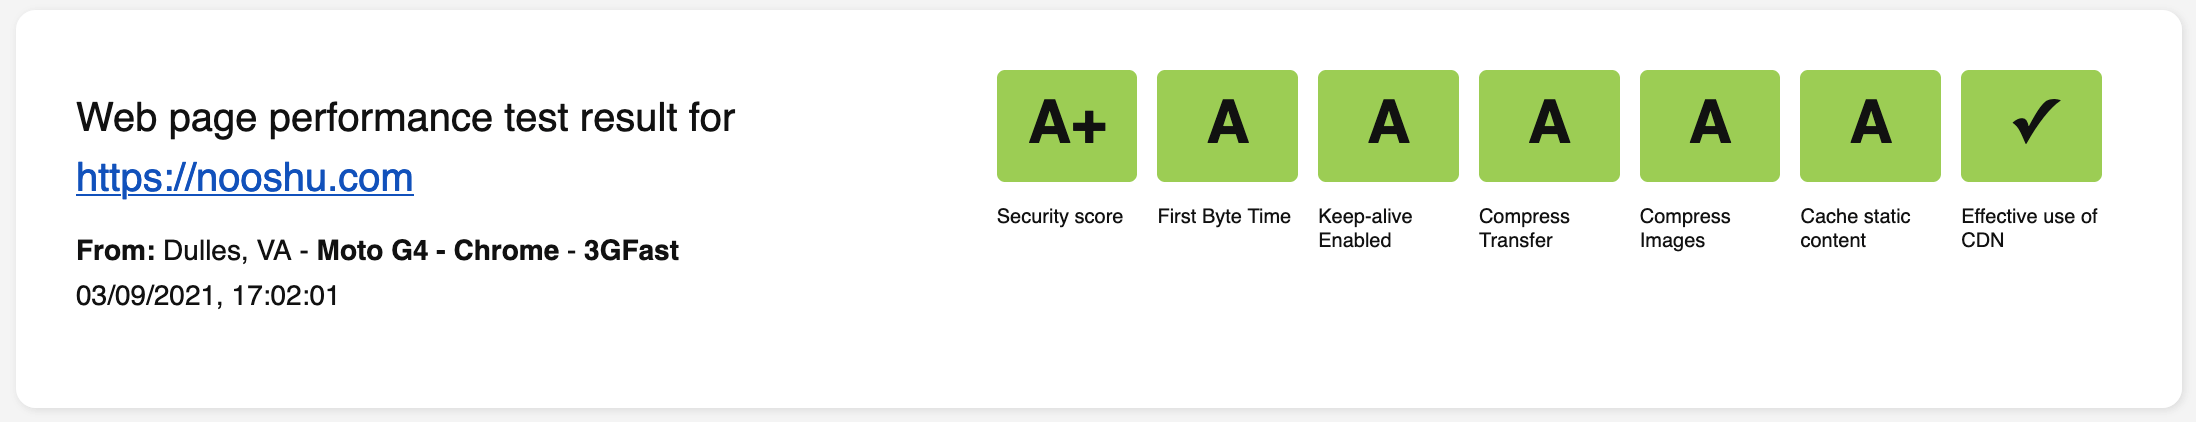 WebPageTest score once all the tweaks are made looks much better. All green across the board!